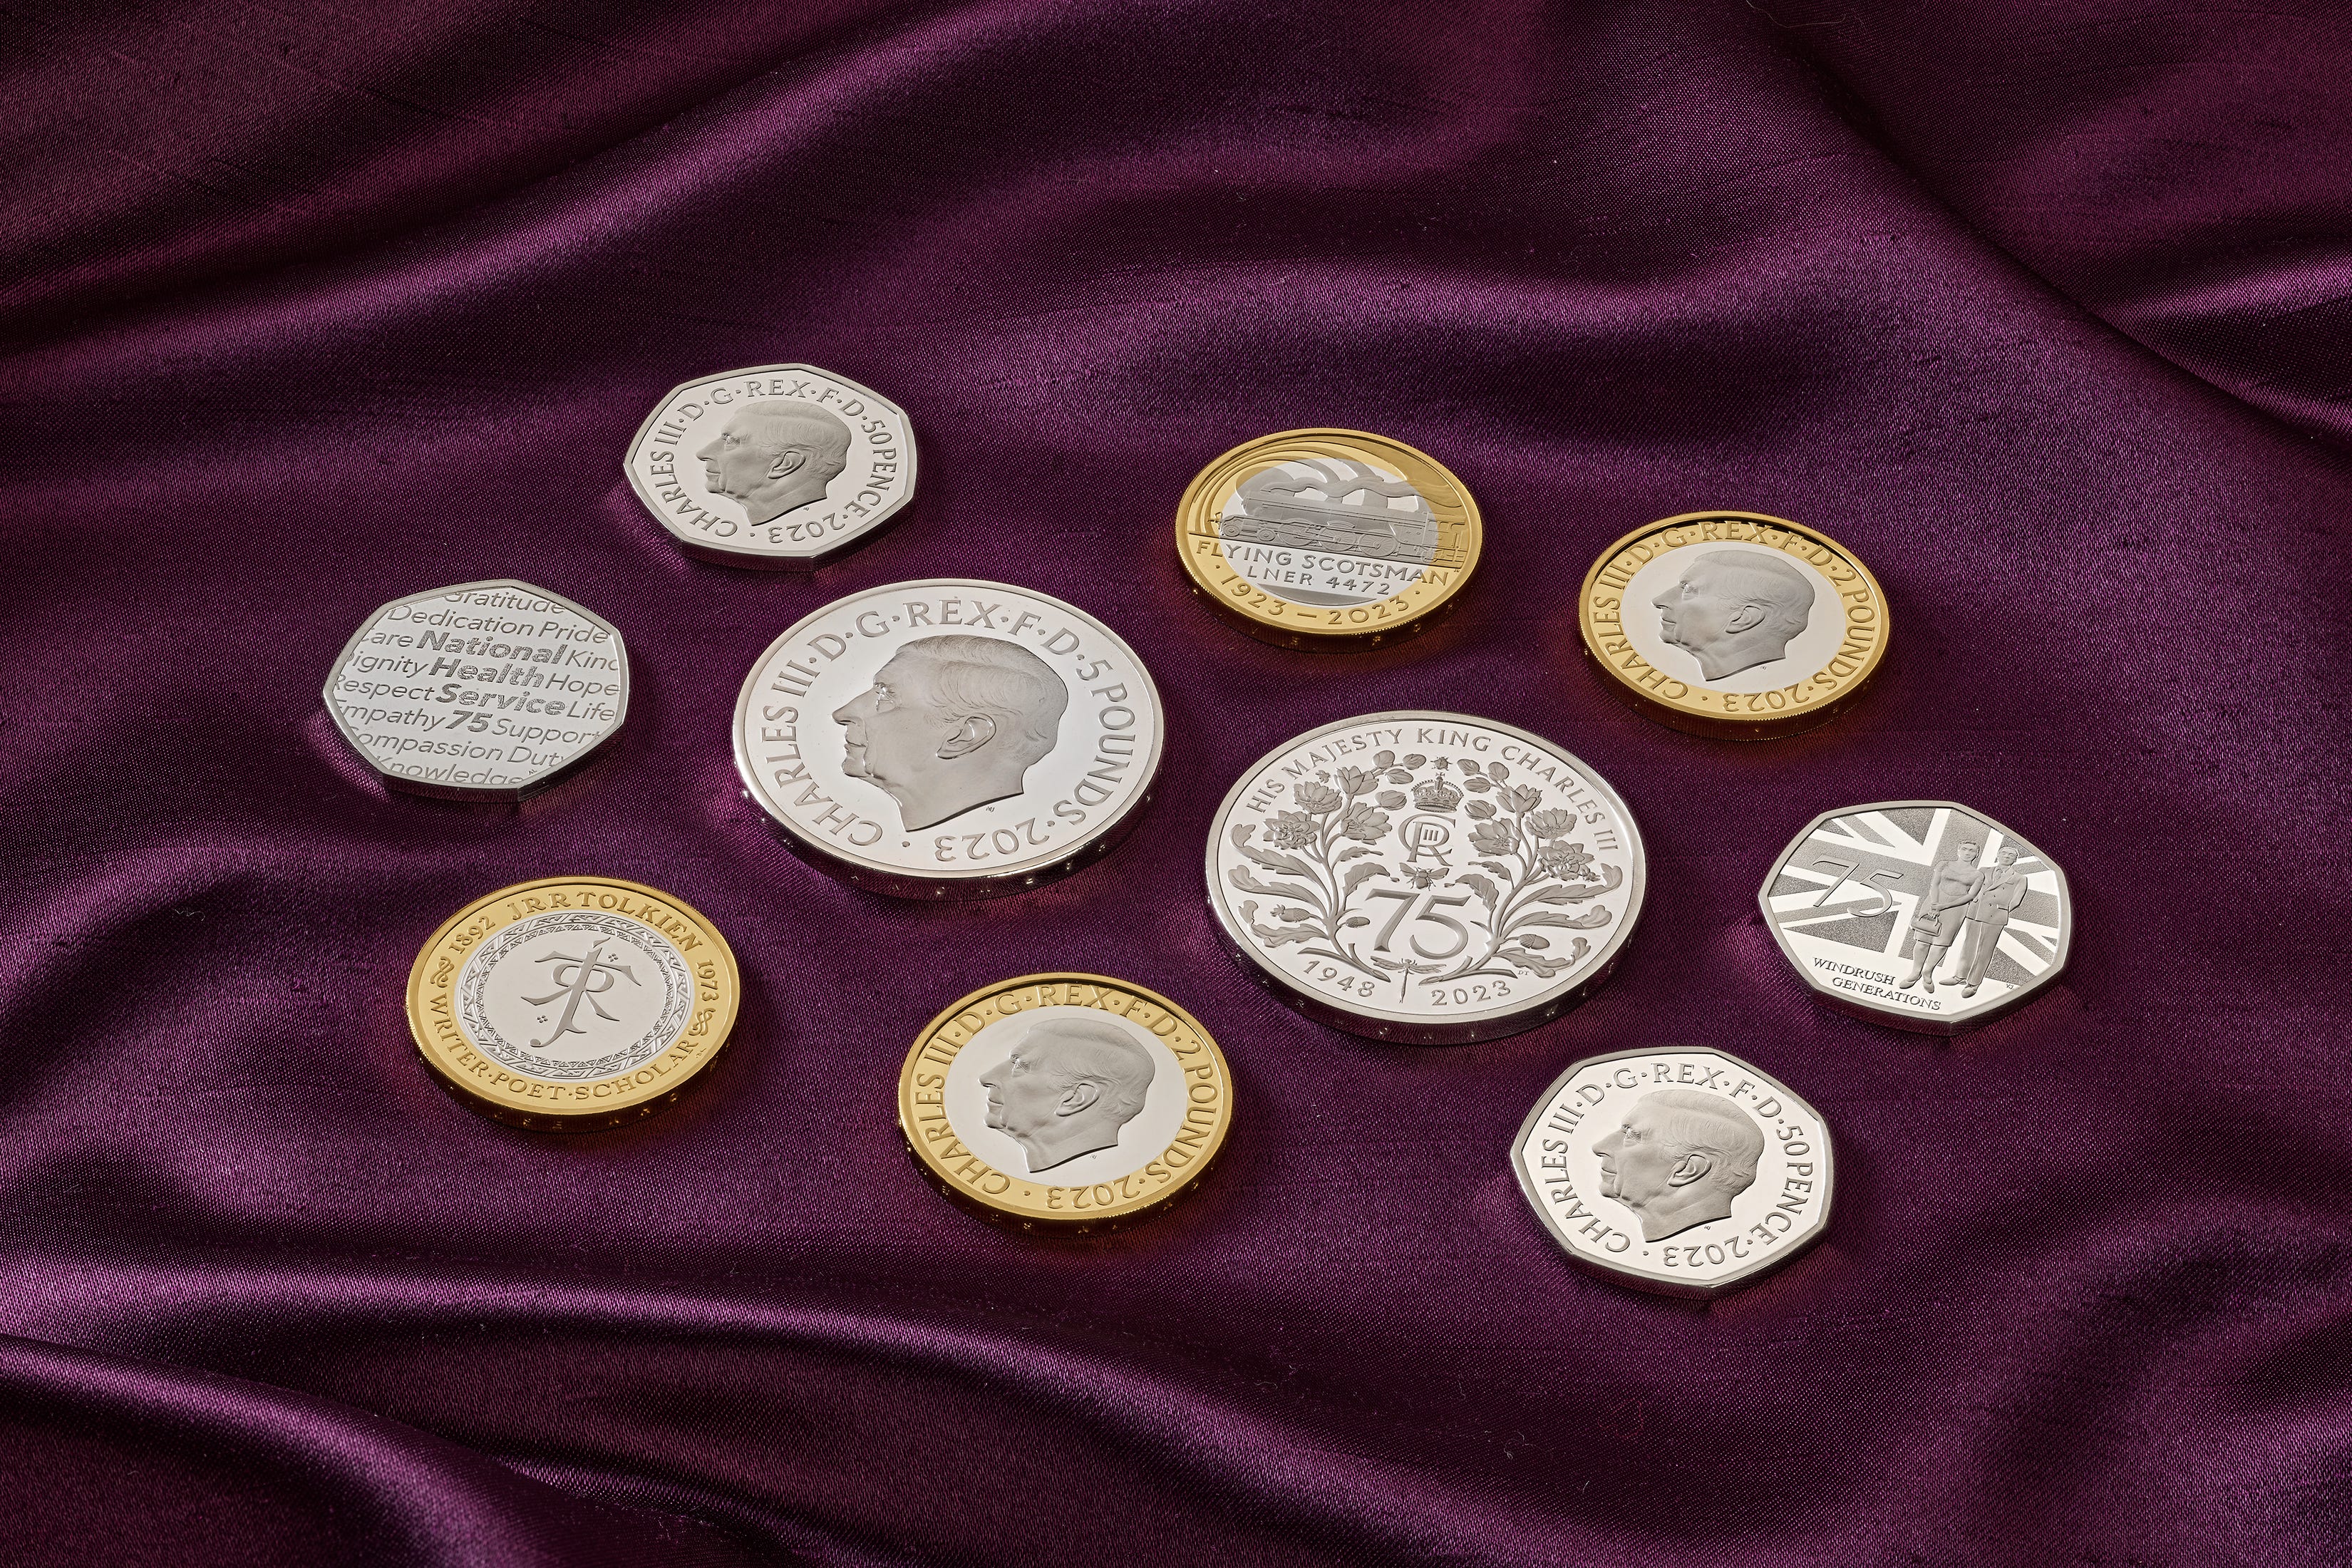 Rare £1 coins: how to find the most valuable ones | The Week